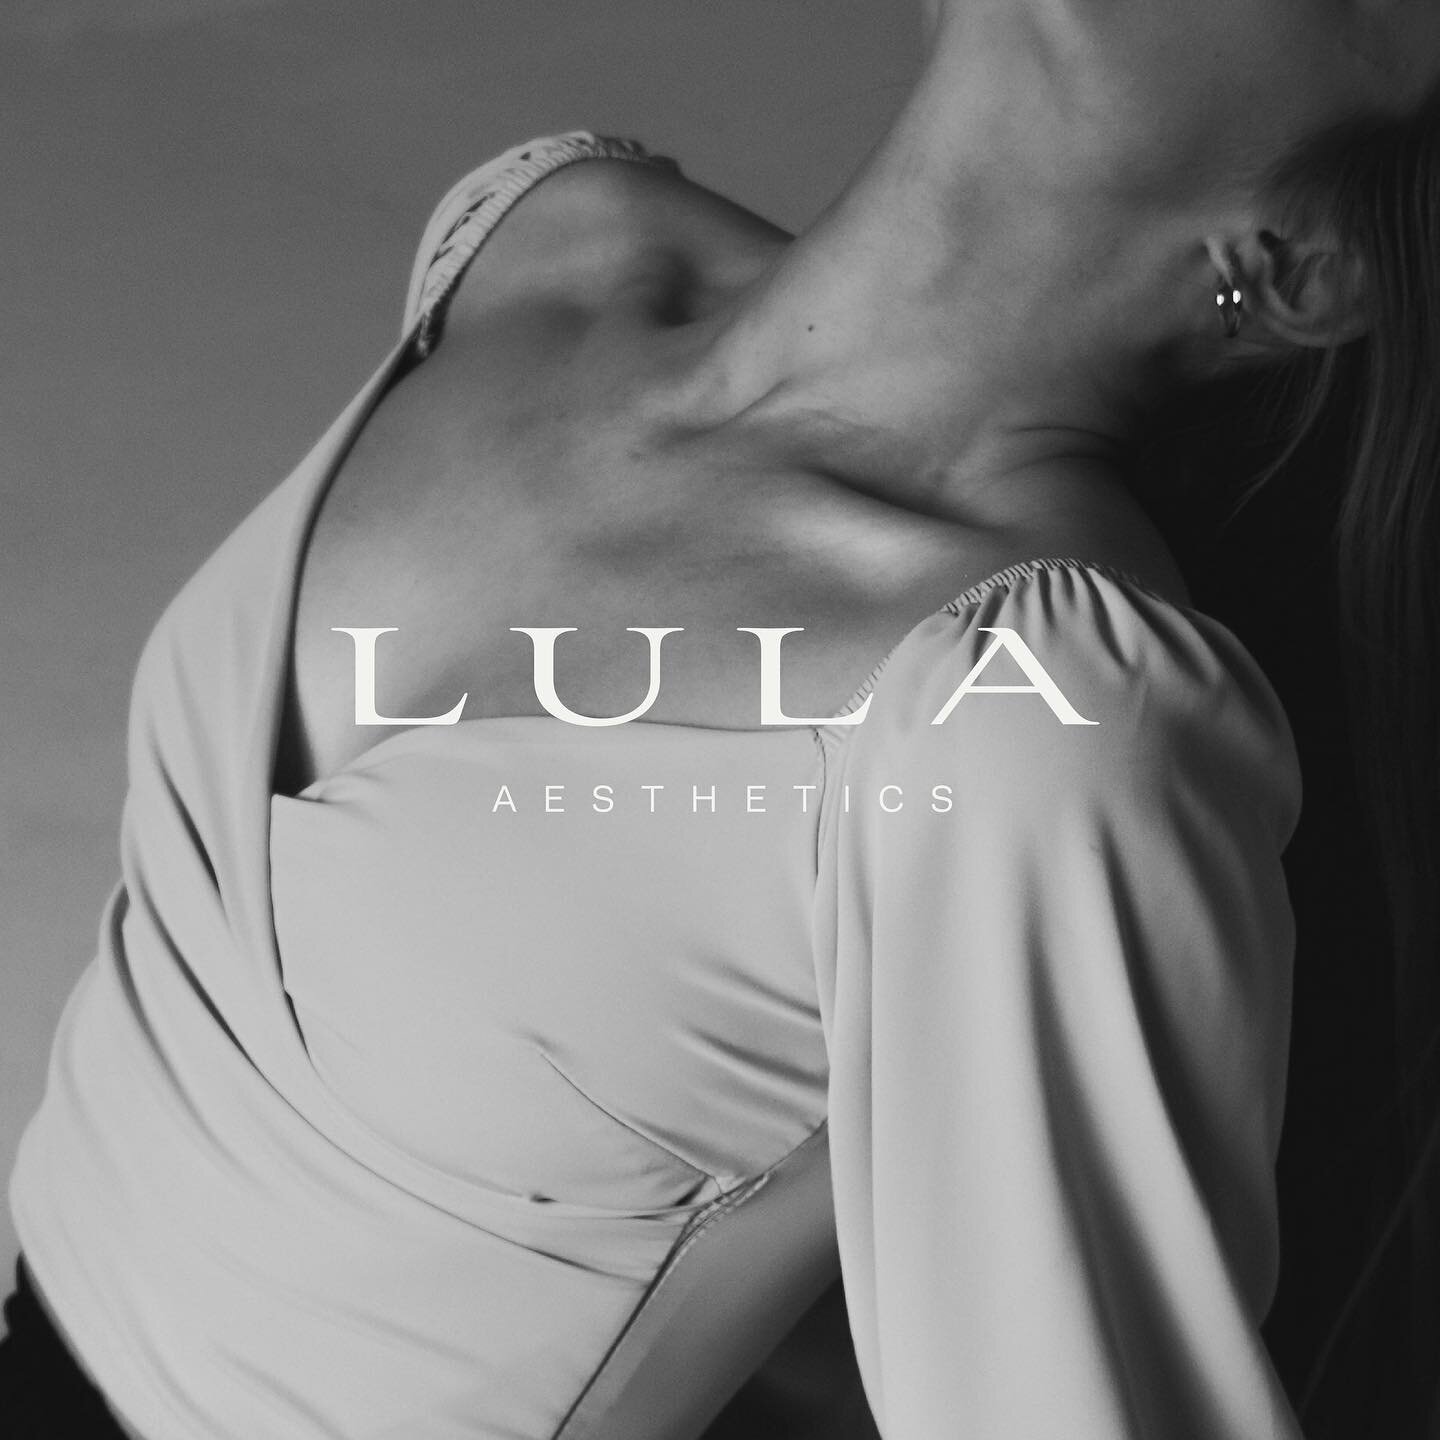 Introducing @lula.aesthetics 
 
Lula Aesthetics is a sophsticated and relaxing realm for those looking to elevate their appearance in a sleek and classy way.
 
Madison wanted a high end, classy and sophisticated brand that incorporated her signature 